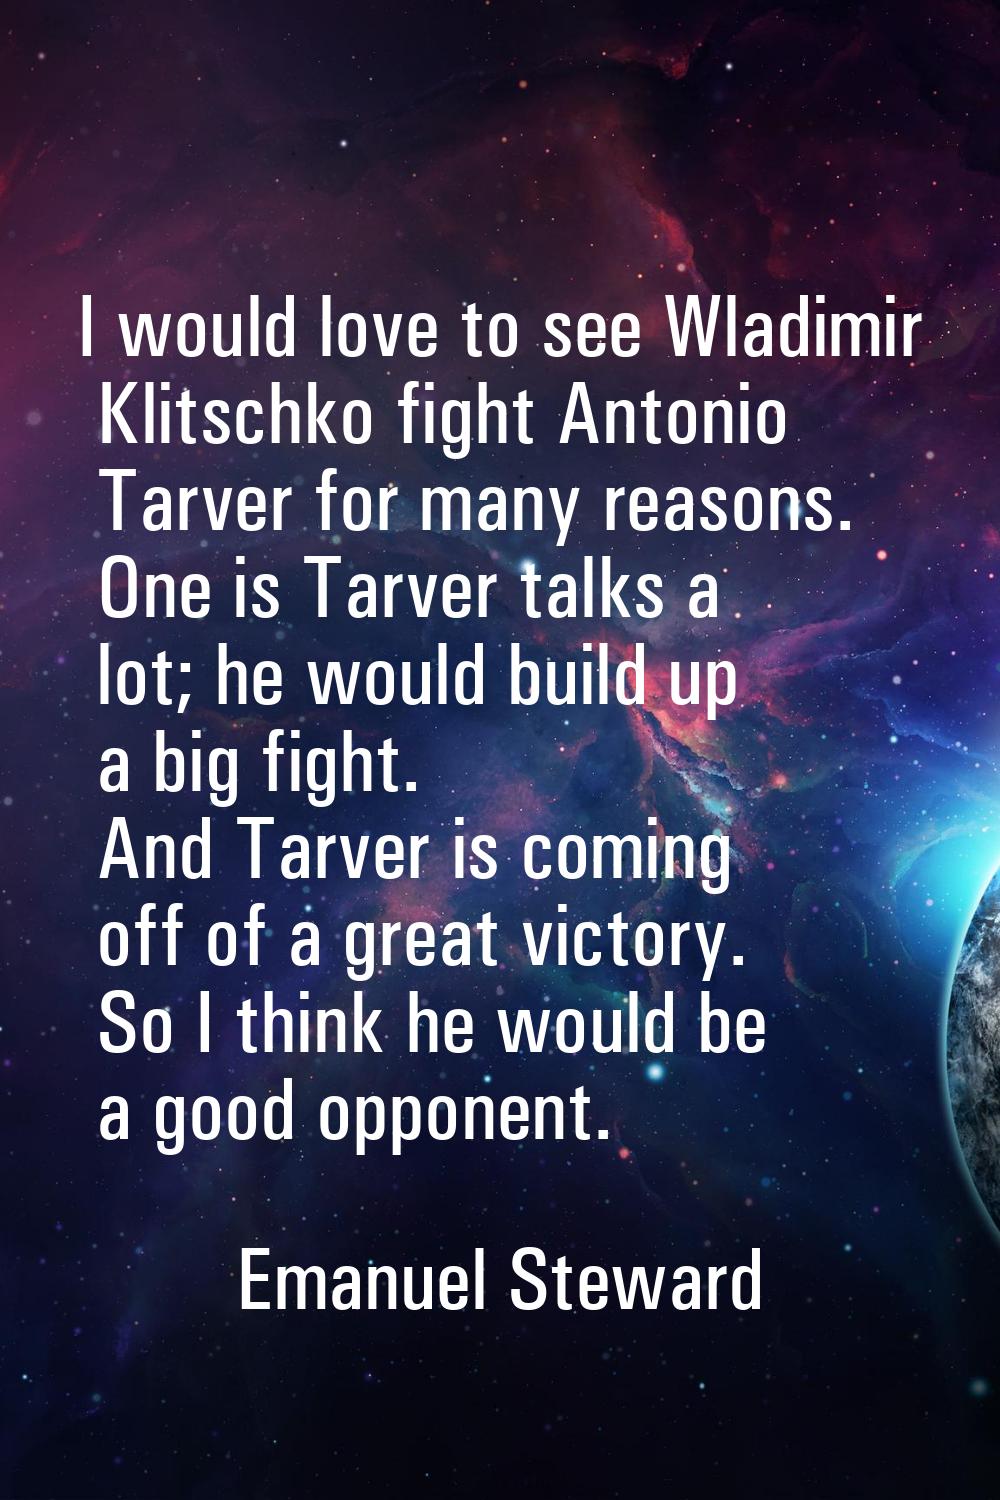 I would love to see Wladimir Klitschko fight Antonio Tarver for many reasons. One is Tarver talks a